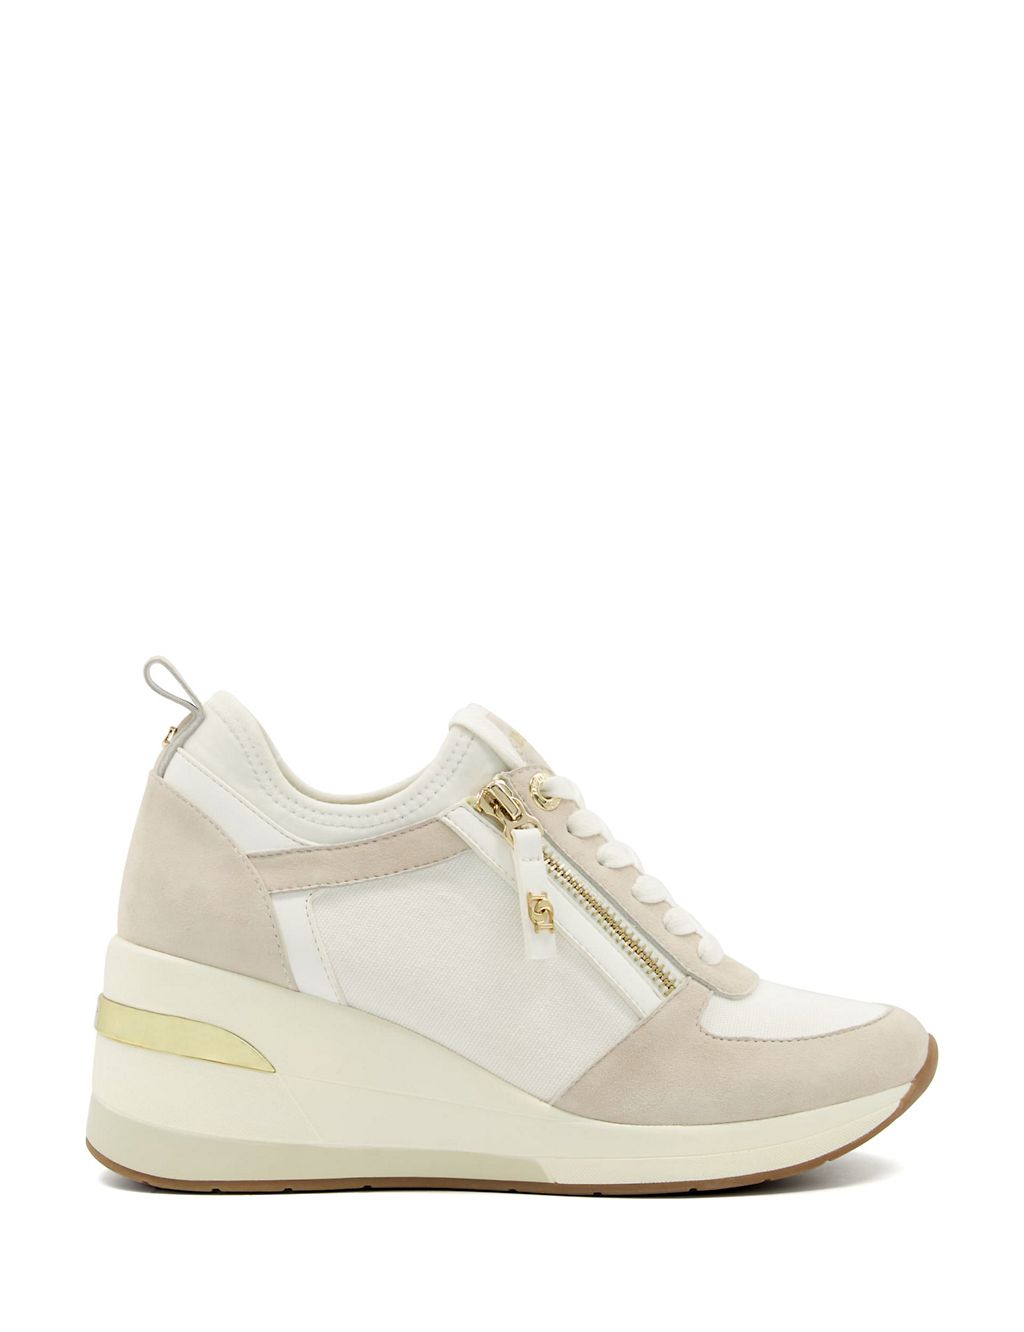 Leather Wedge Suede Panel Trainers 3 of 5